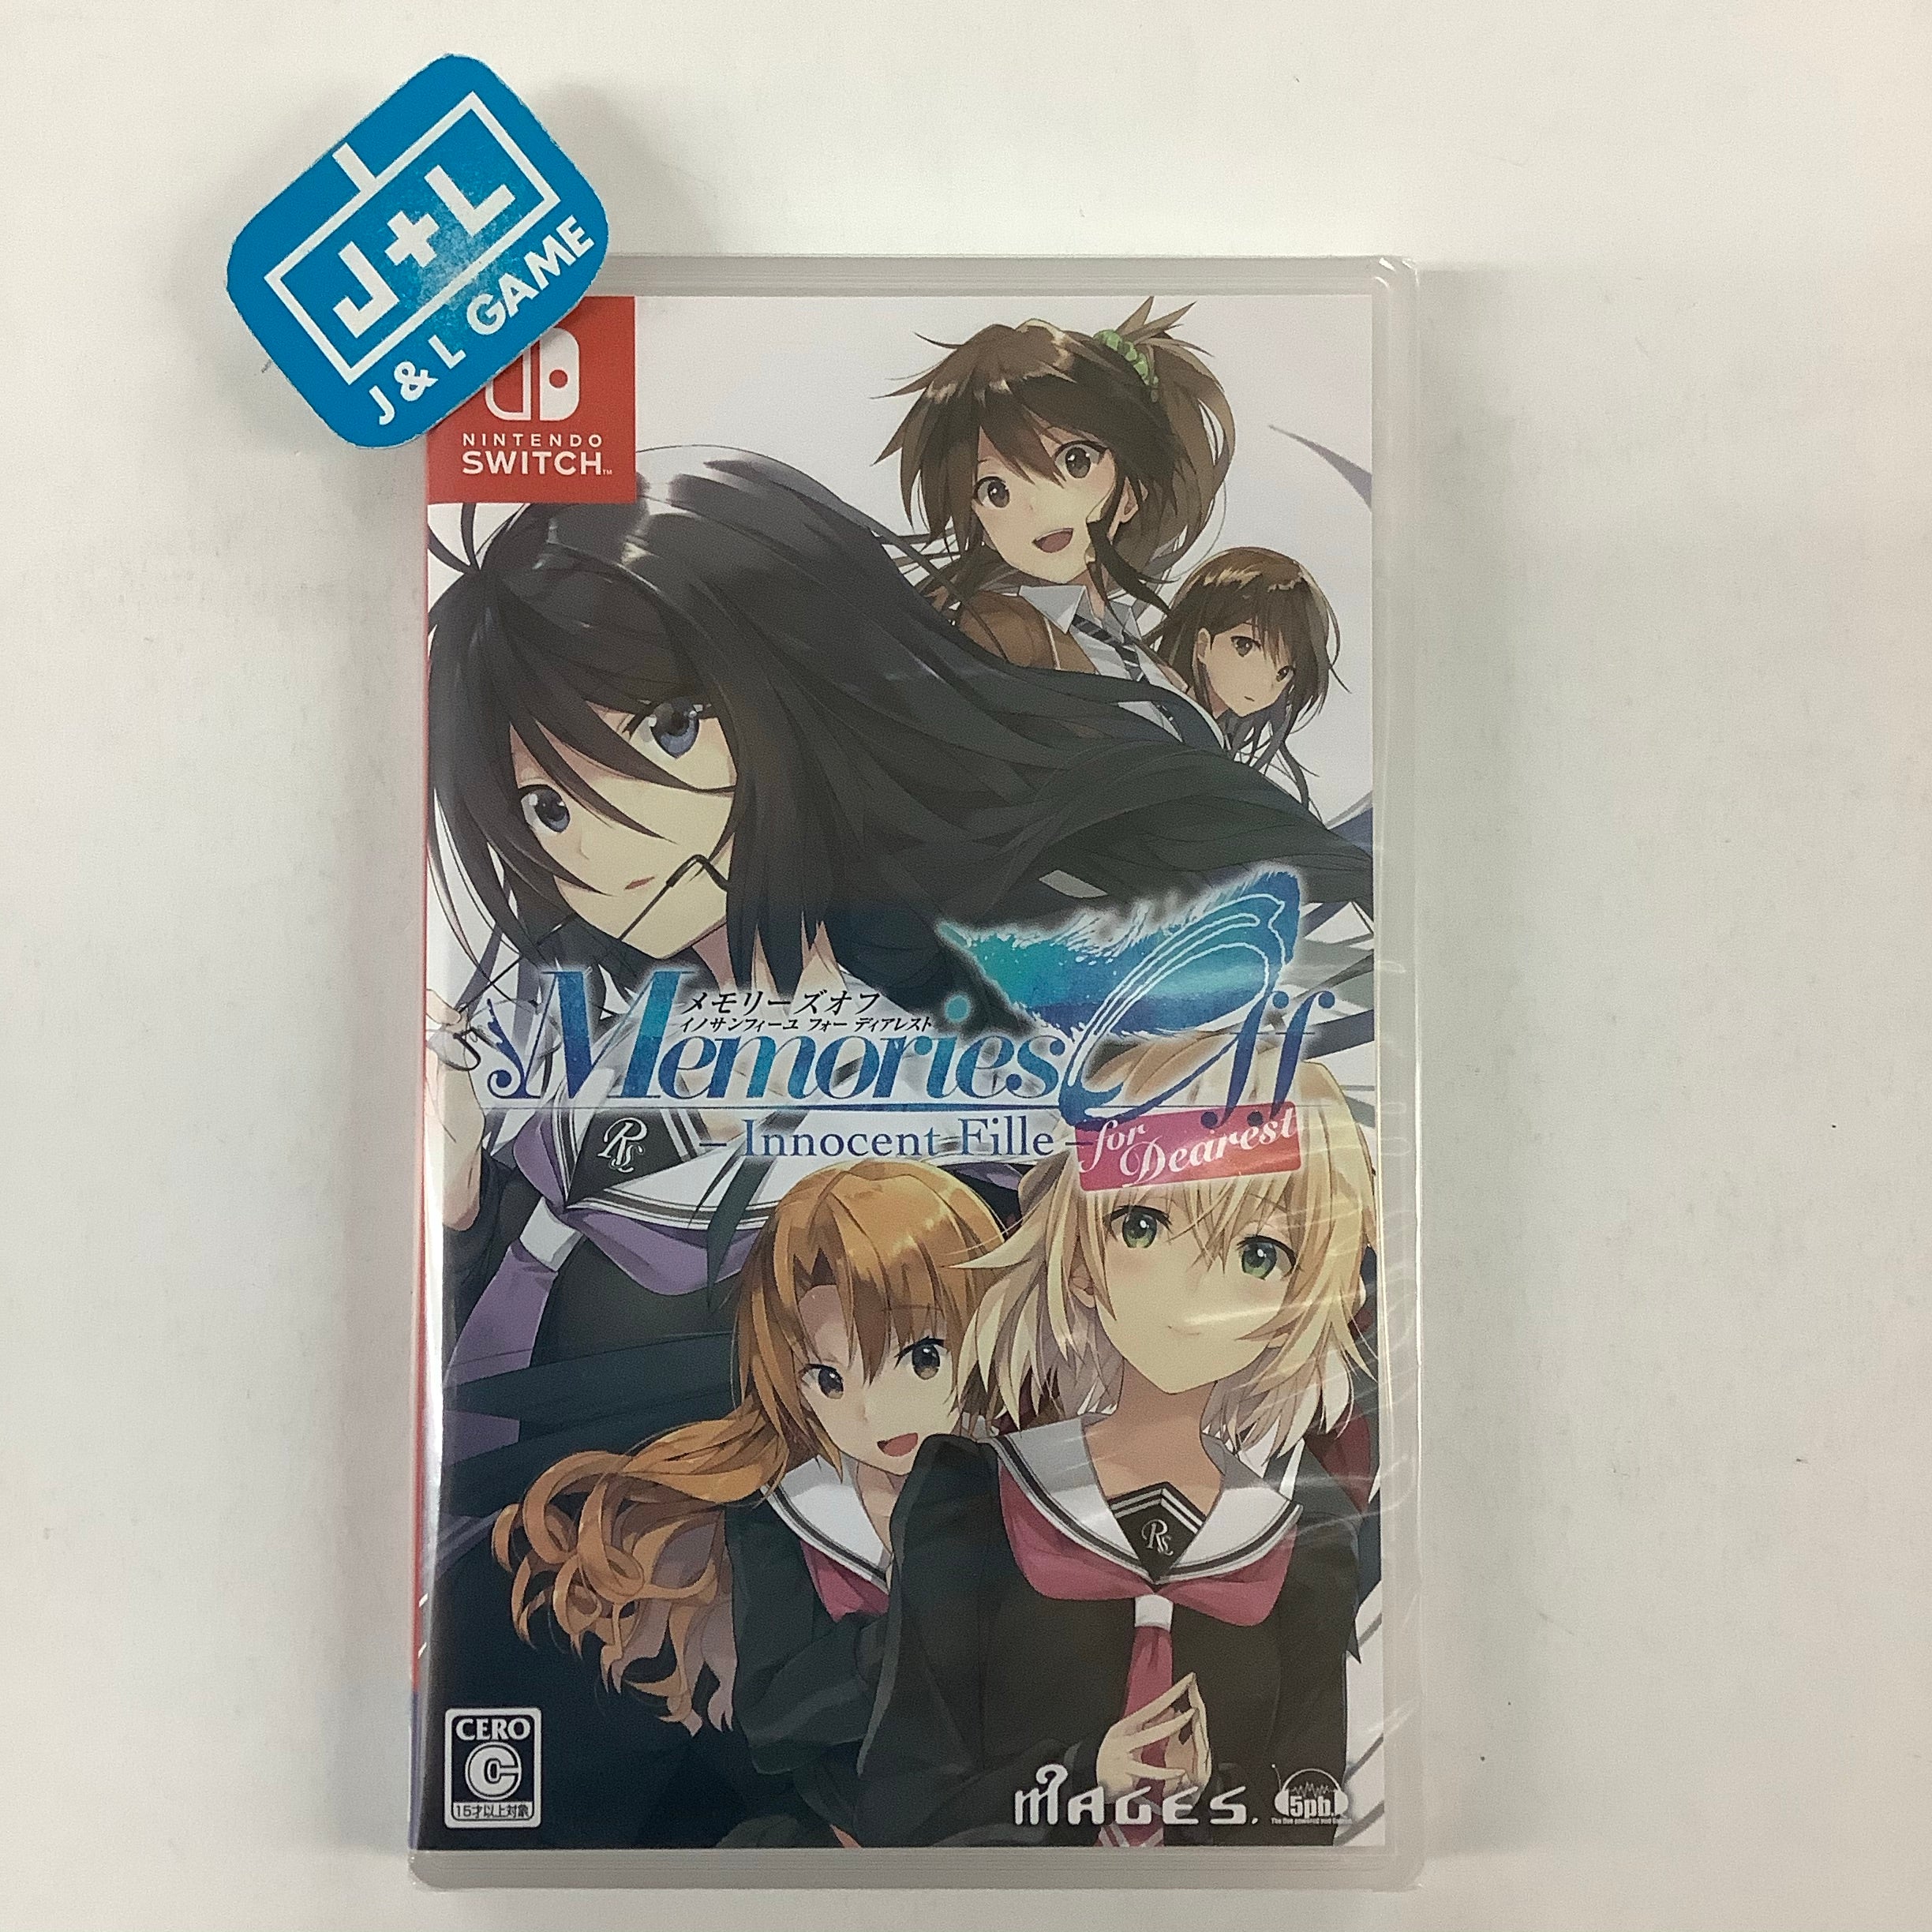 Memories Off -Innocent Fille- for Dearest - (NSW) Nintendo Switch (Japanese Import) Video Games 5pb   